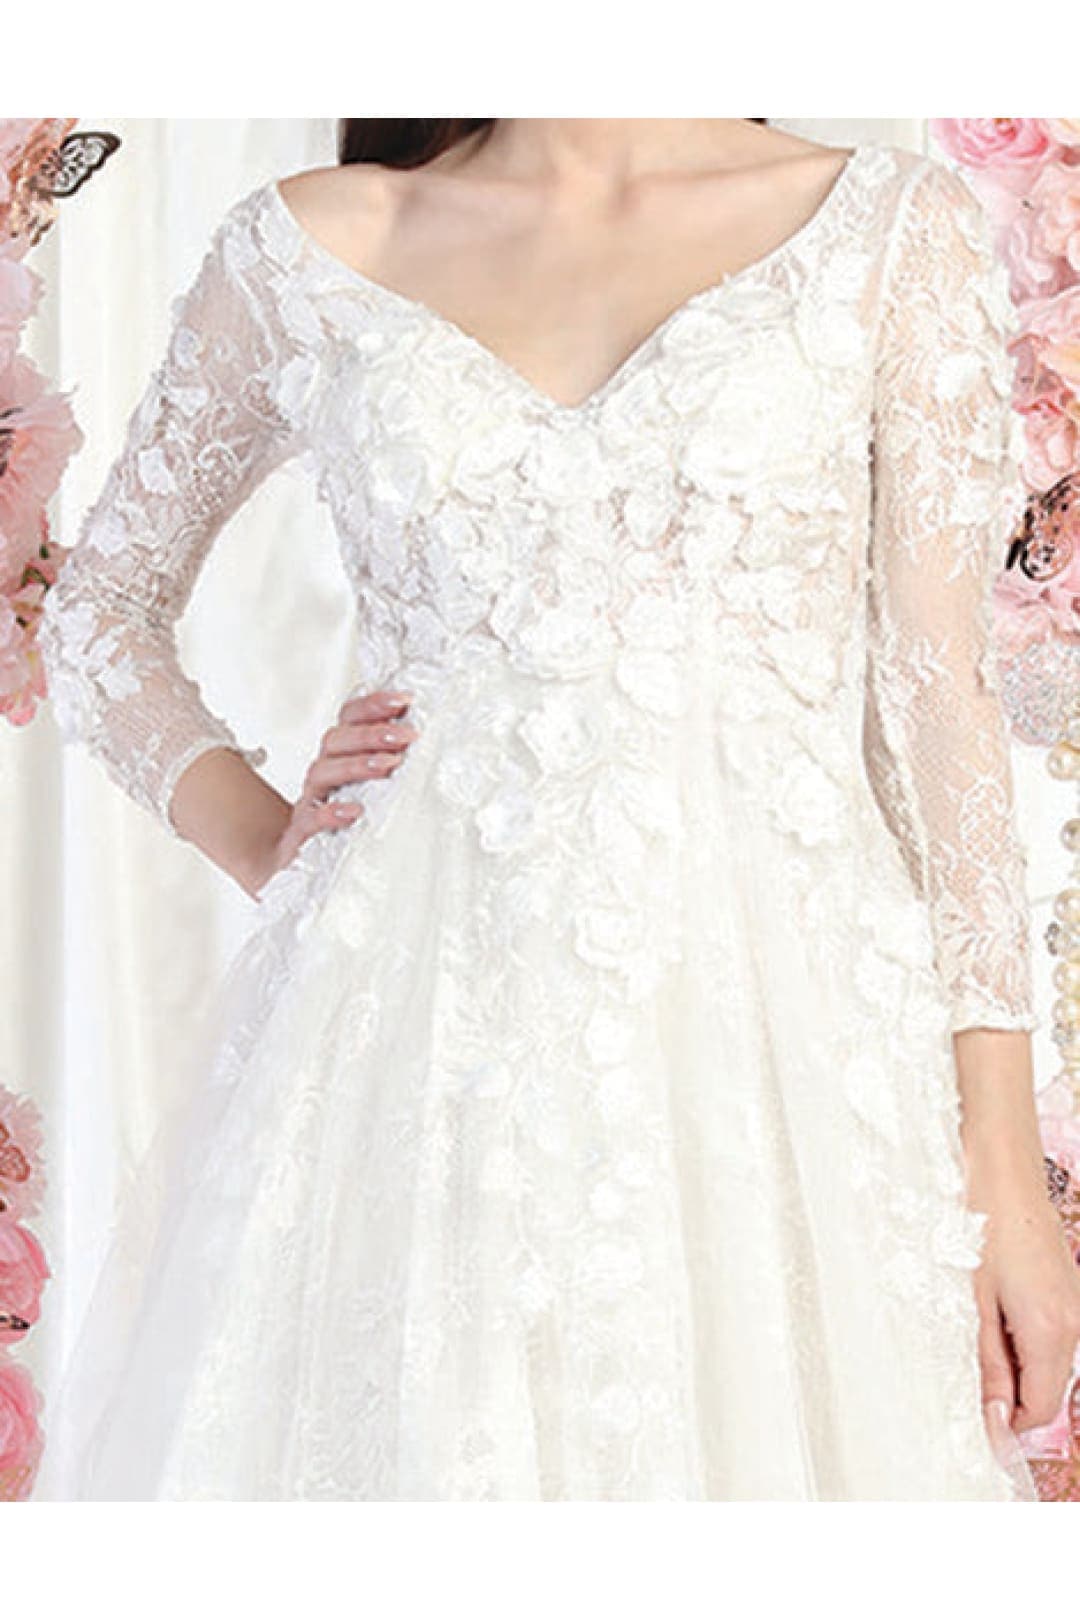 Royal Queen RQ7996 Long Sleeve Floral Bridal Gown - Dress